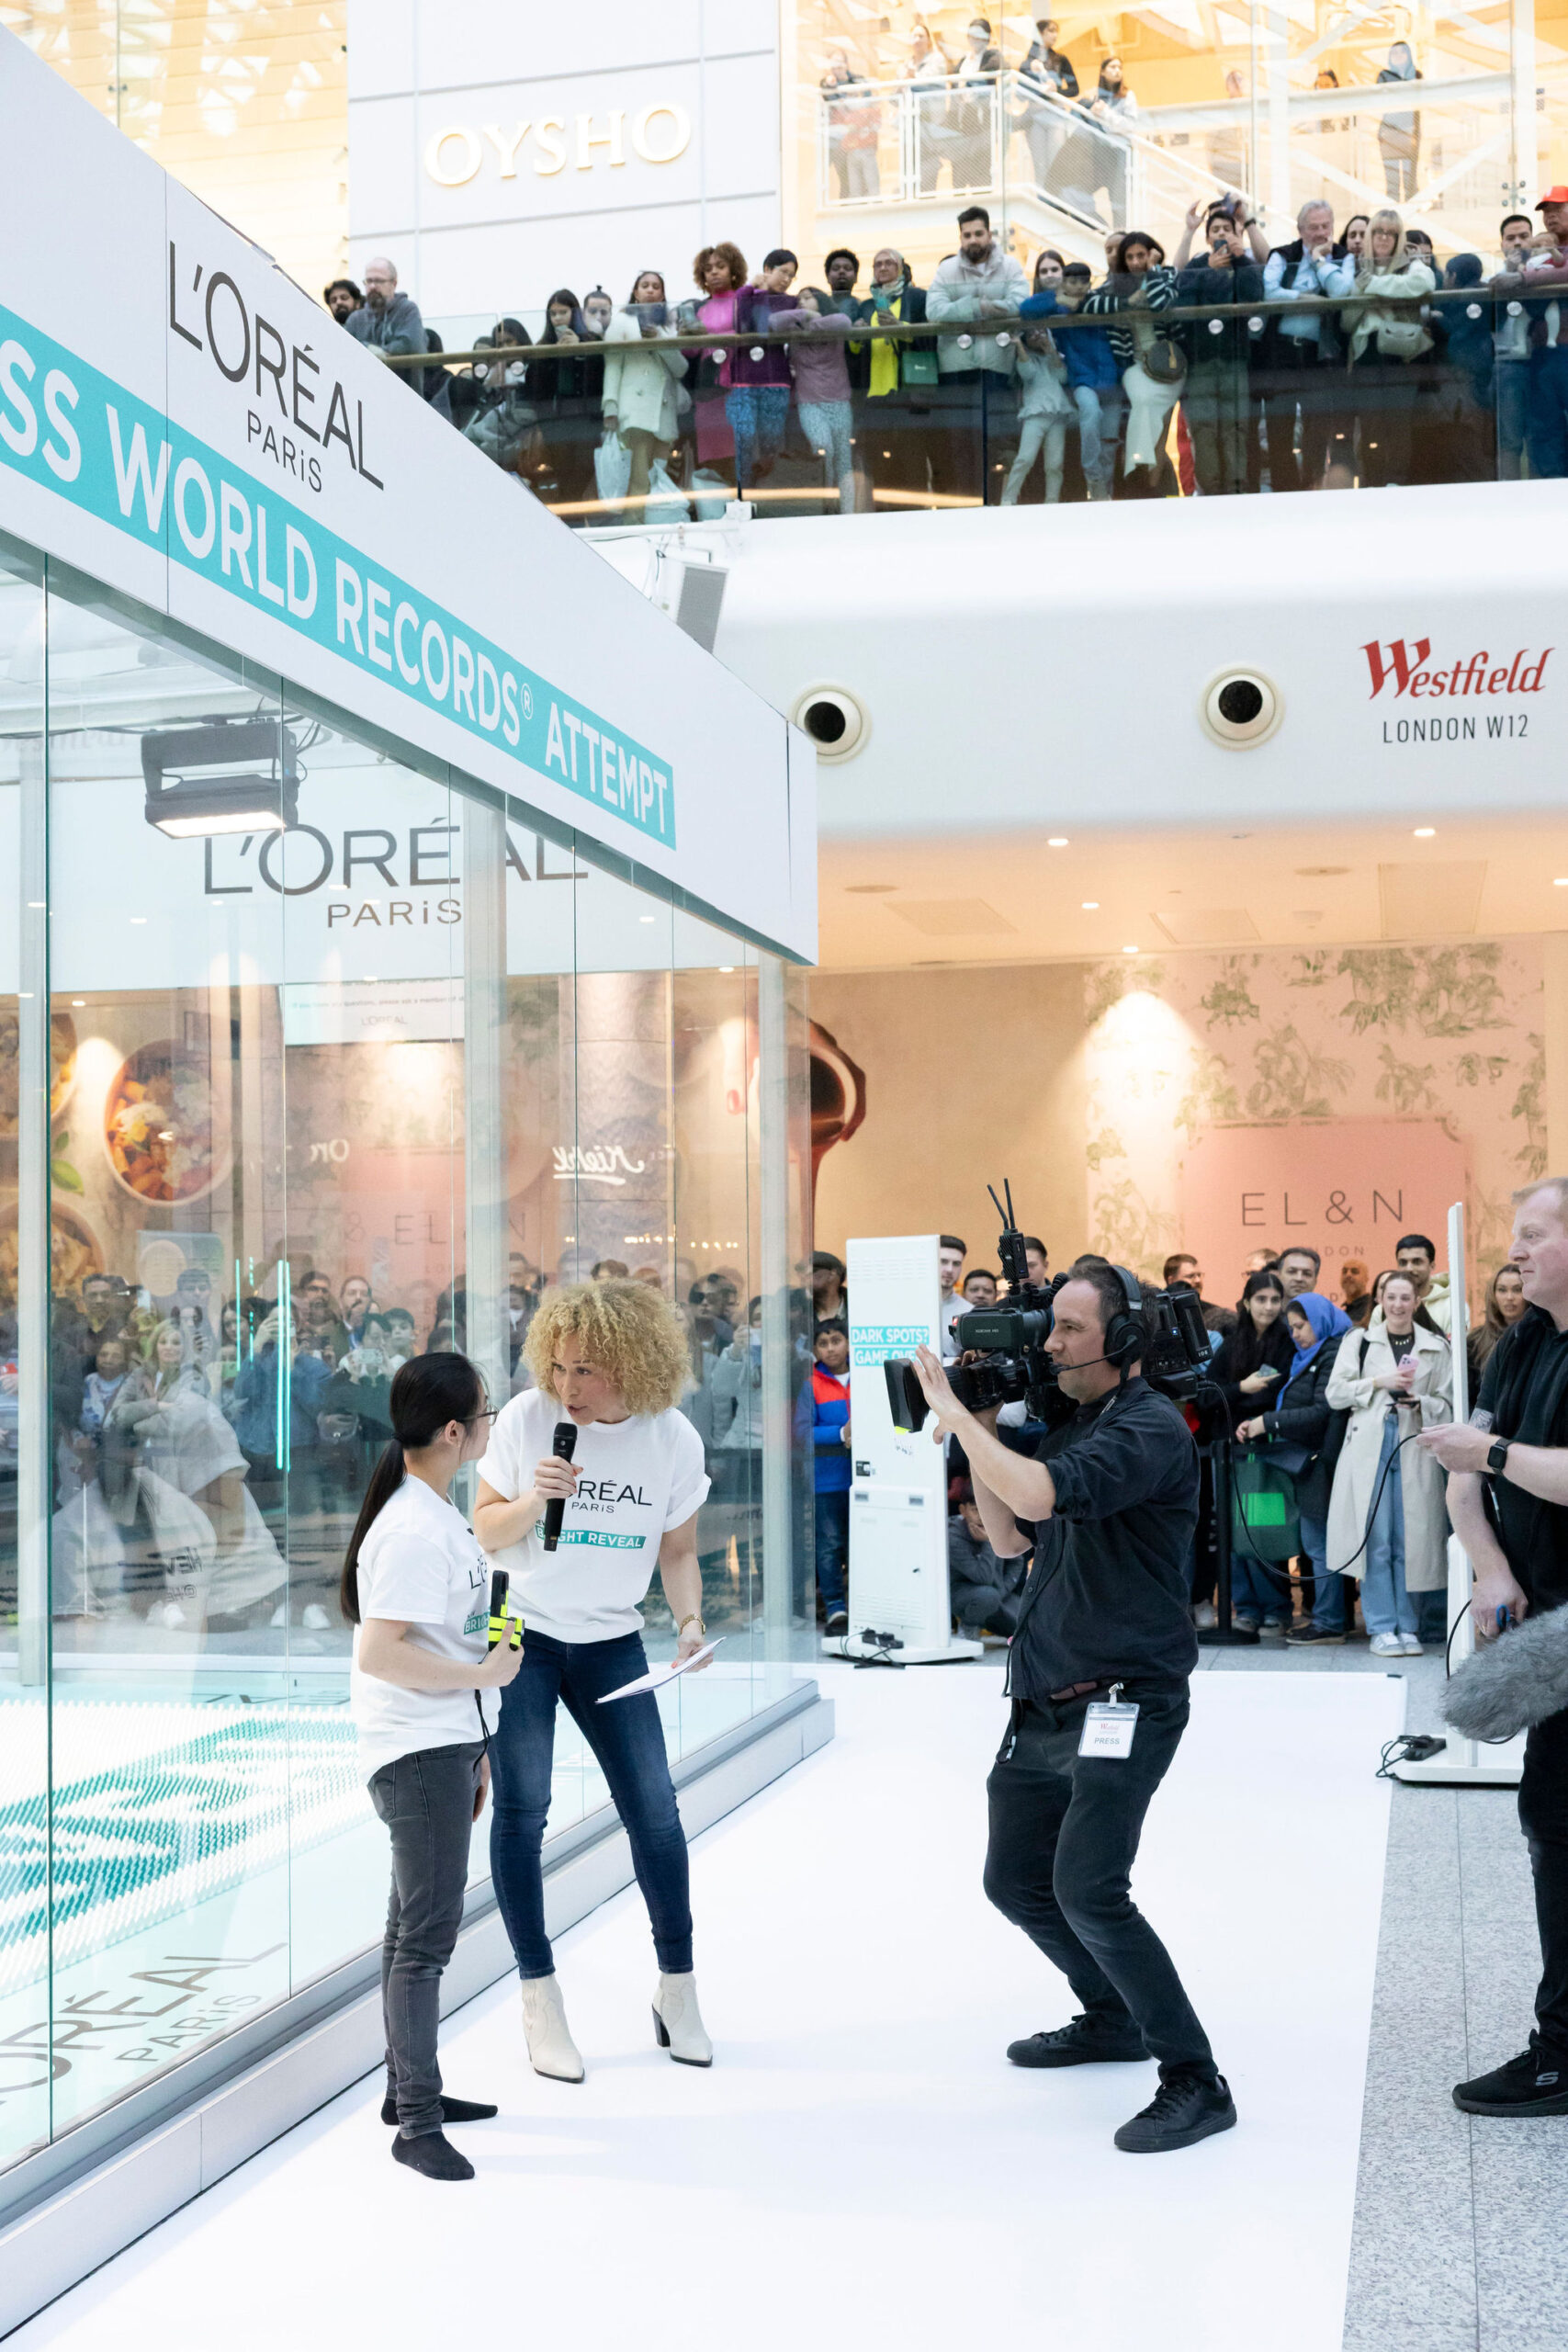 YouTube sensation jets in to break domino toppling world record at Westfield London